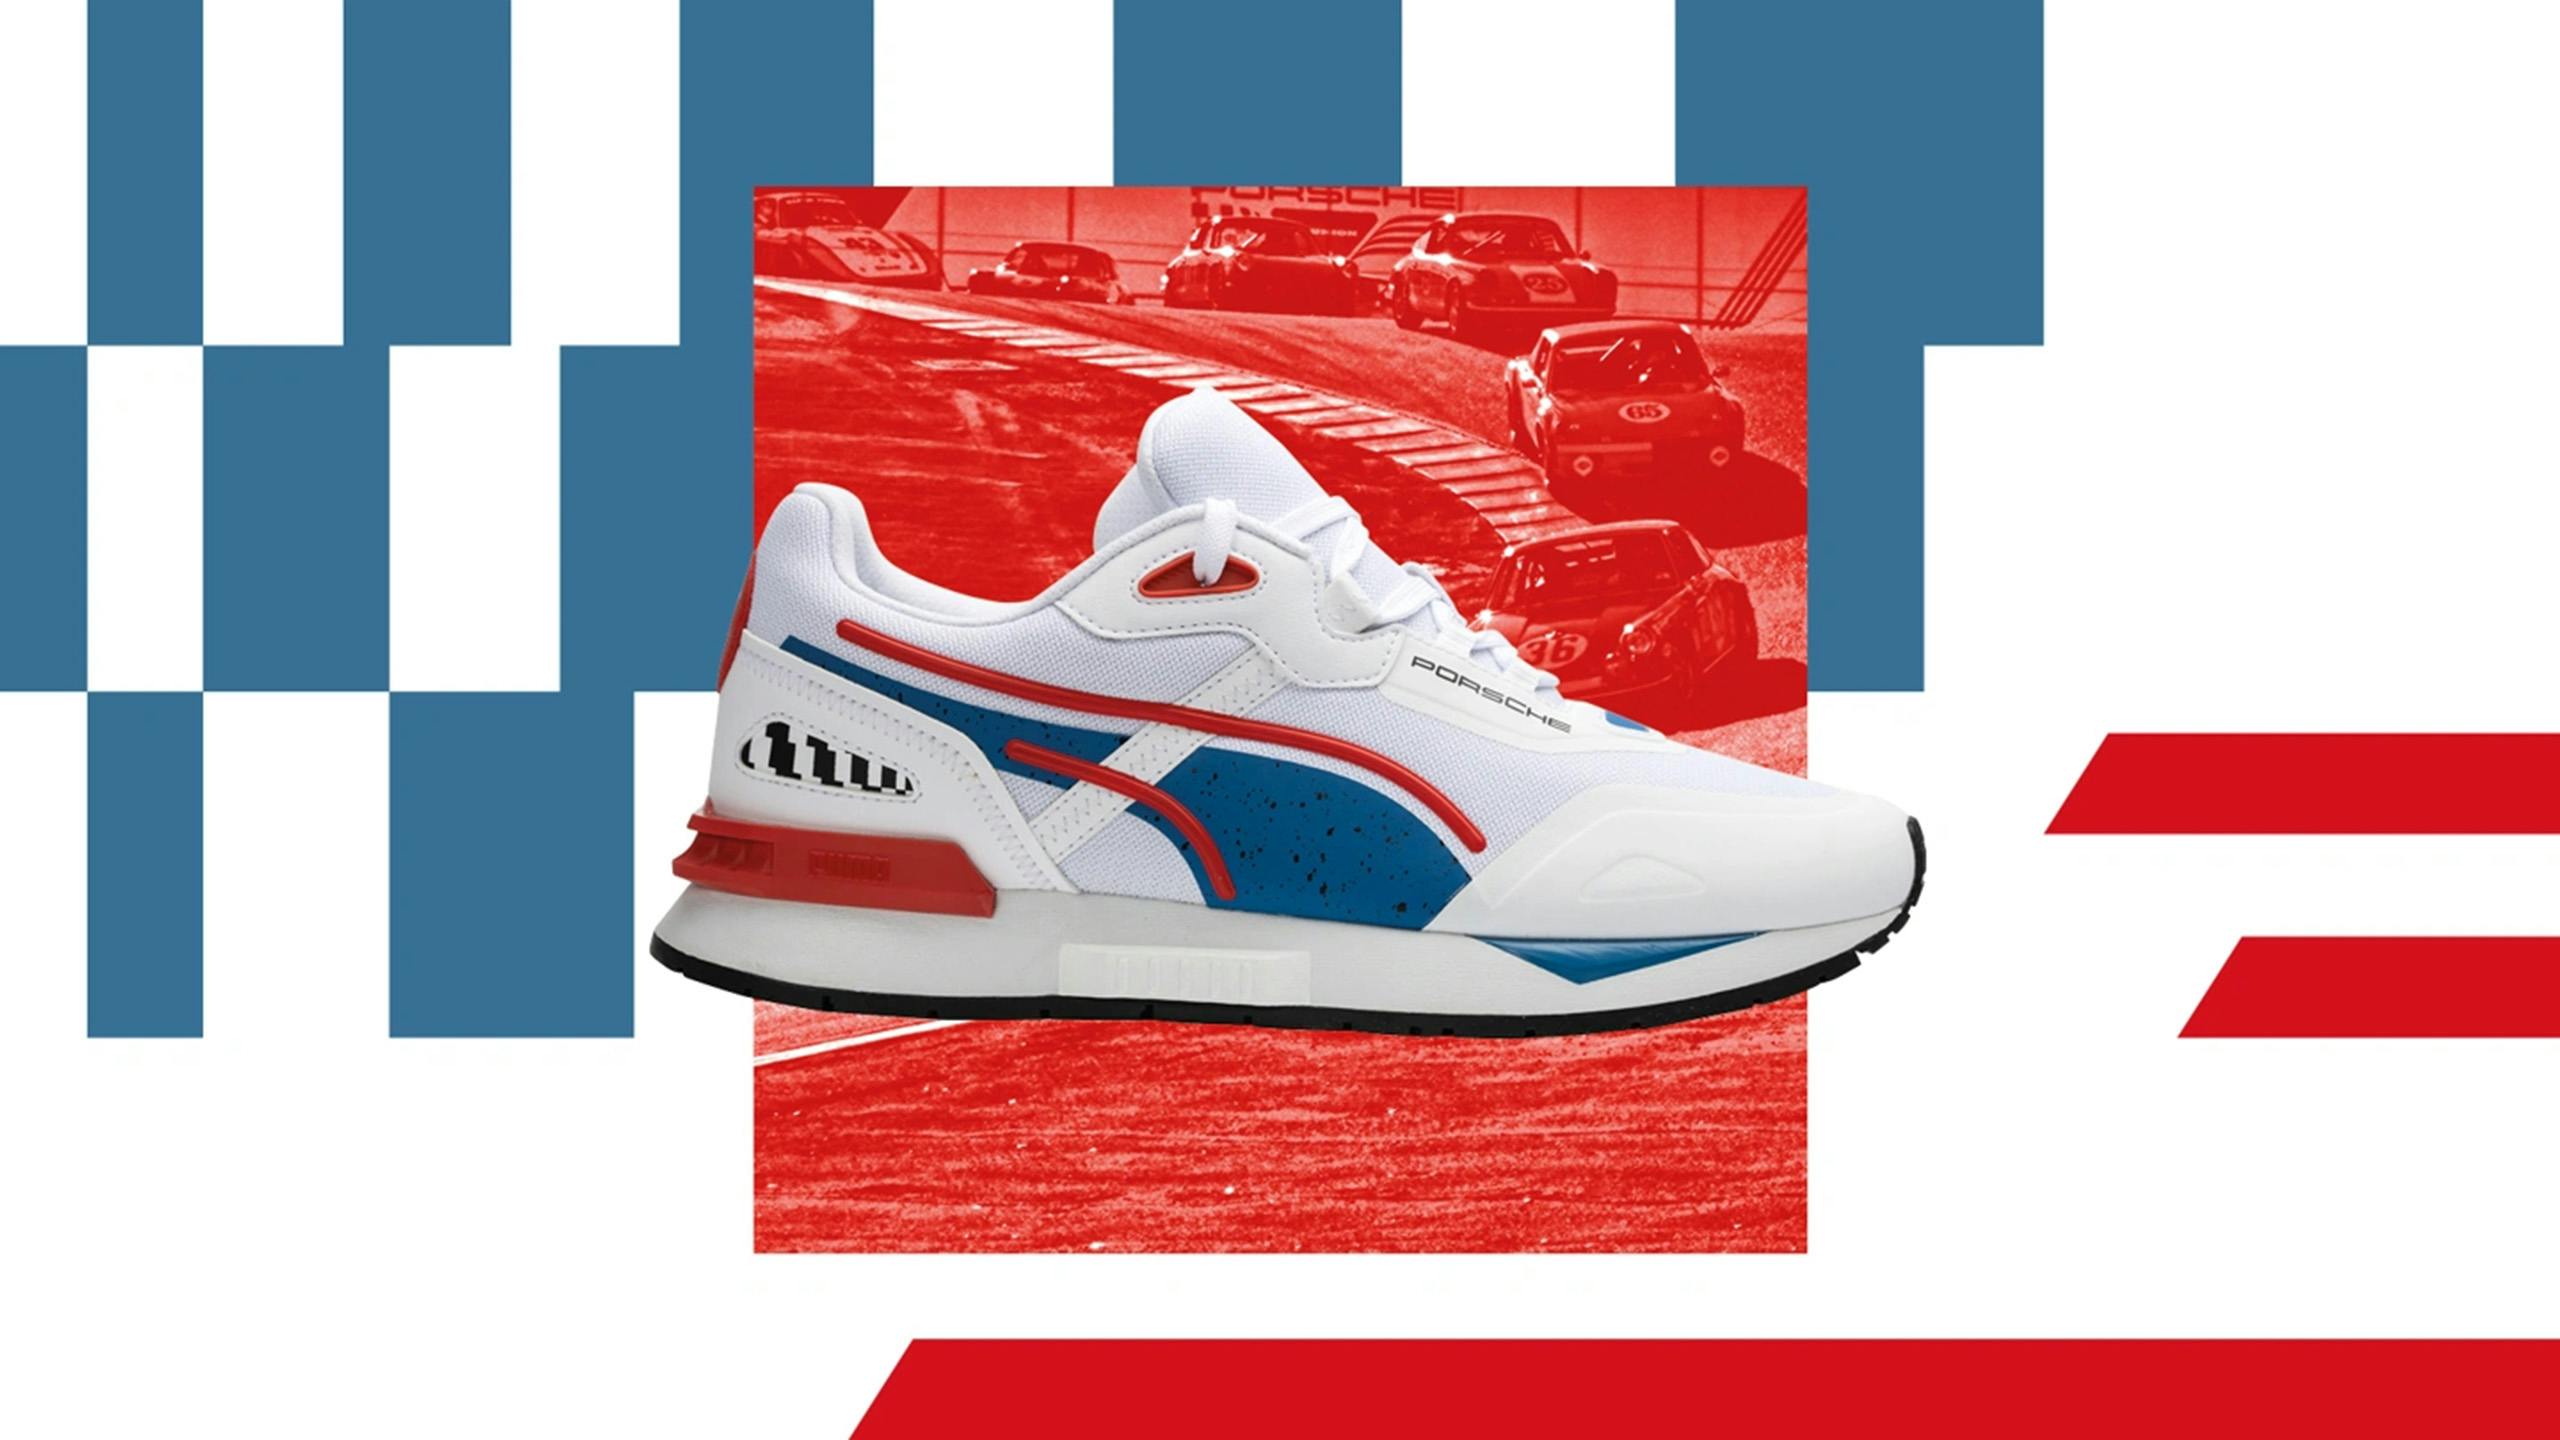 You can see a white sneaker with red and blue details. In the background you can see an old picture with a Porsche racetrack.